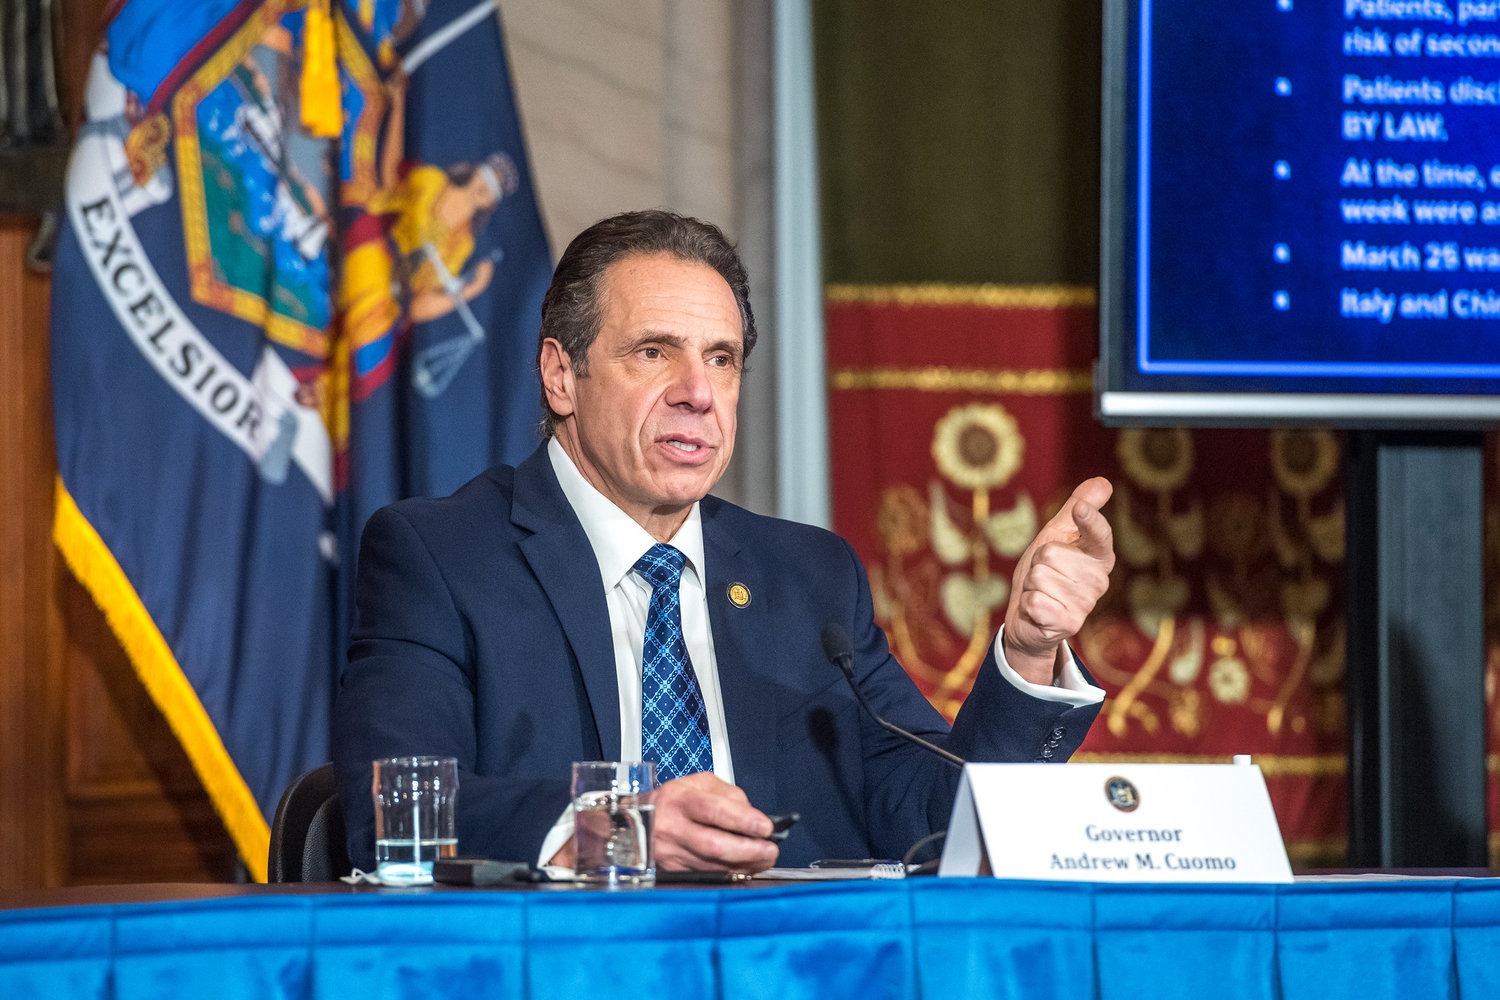 Gov. Andrew Cuomo is restoring some of New York City's overnight subway service, closing the system down between 2 and 4 a.m., beginning Feb. 22.